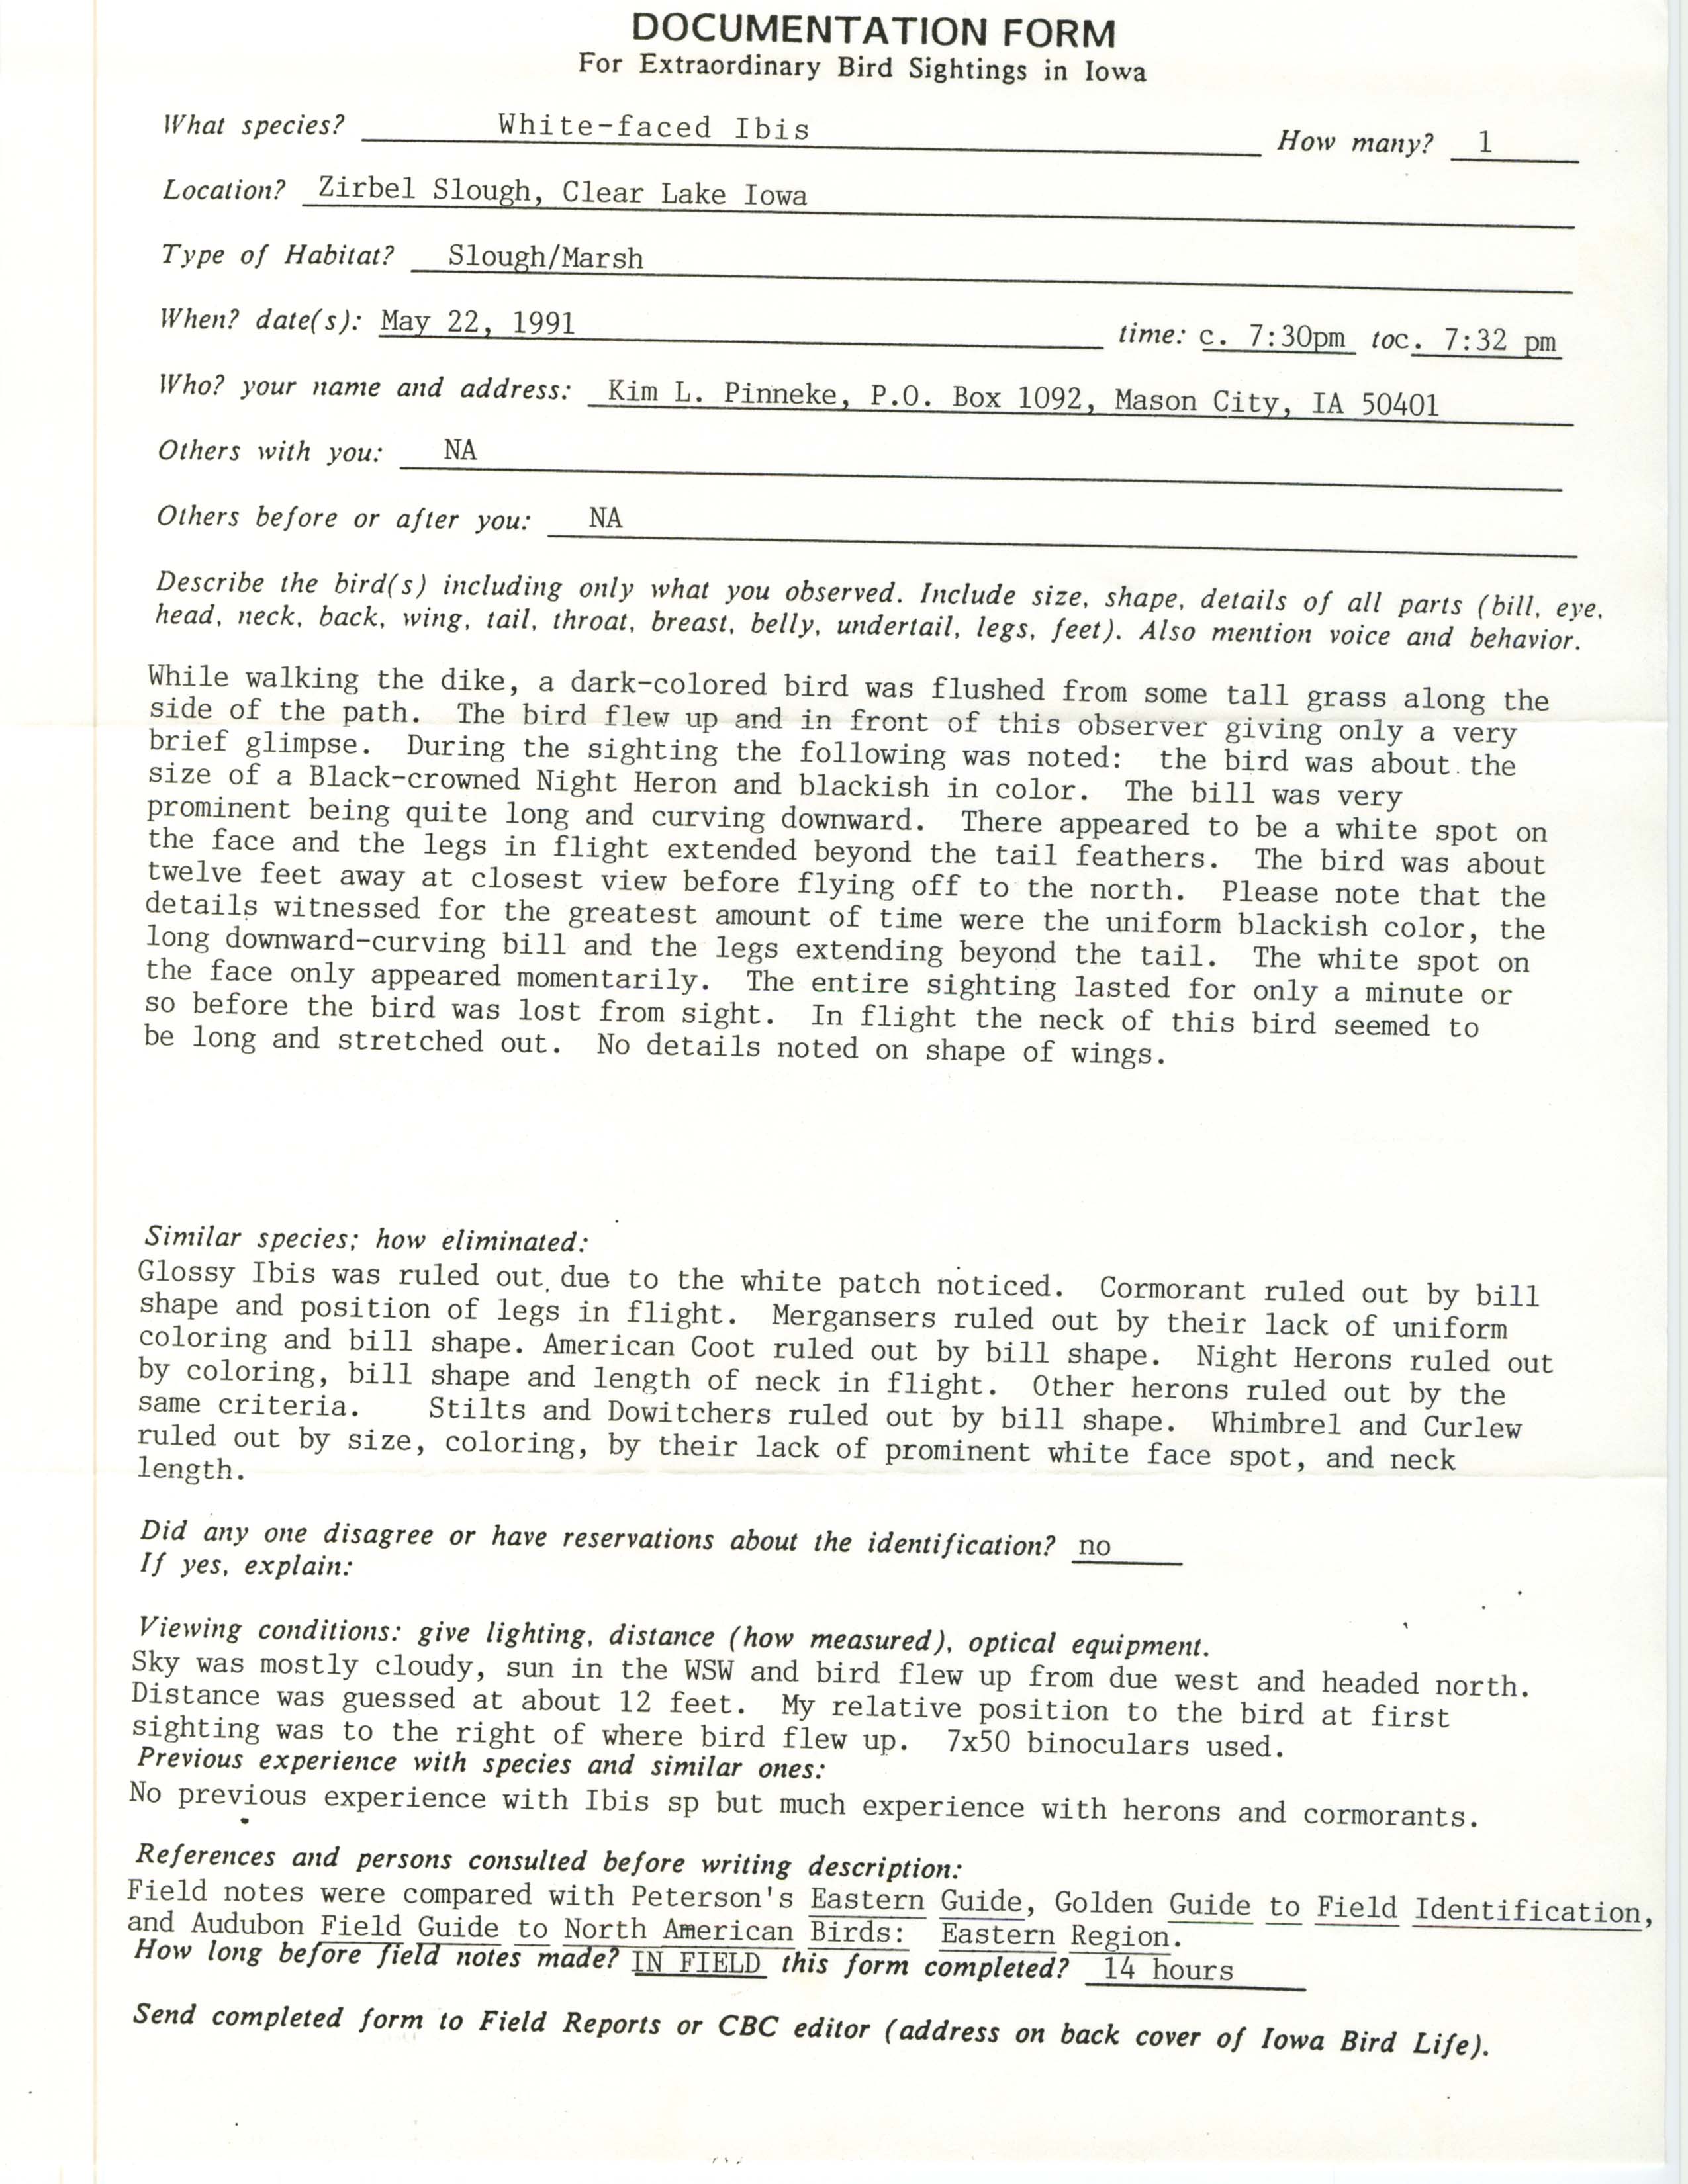 Rare bird documentation form for White-faced Ibis at Zirbel Slough, 1991